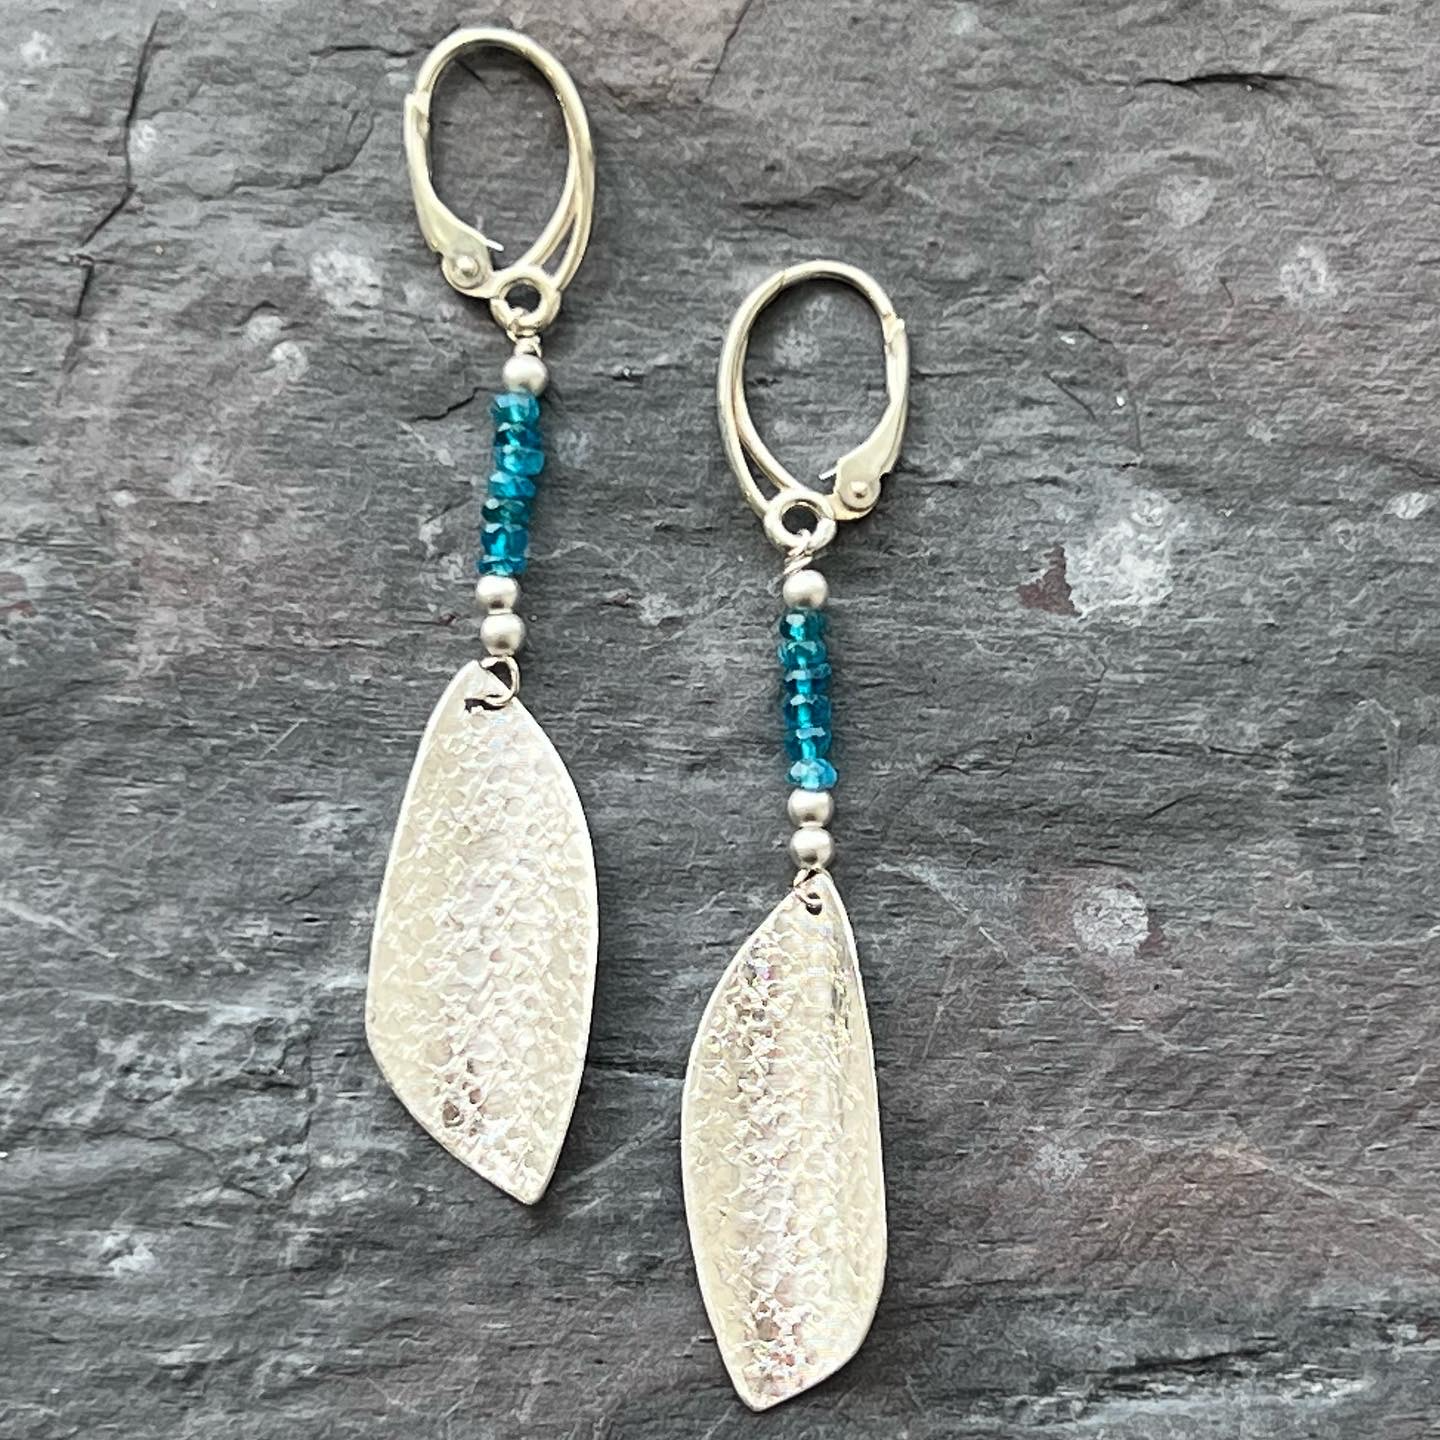 Handmade textured sterling silver and apatite earrings by Garden of Silver in Westhampton Beach, NY. www.gardenofsilver.com